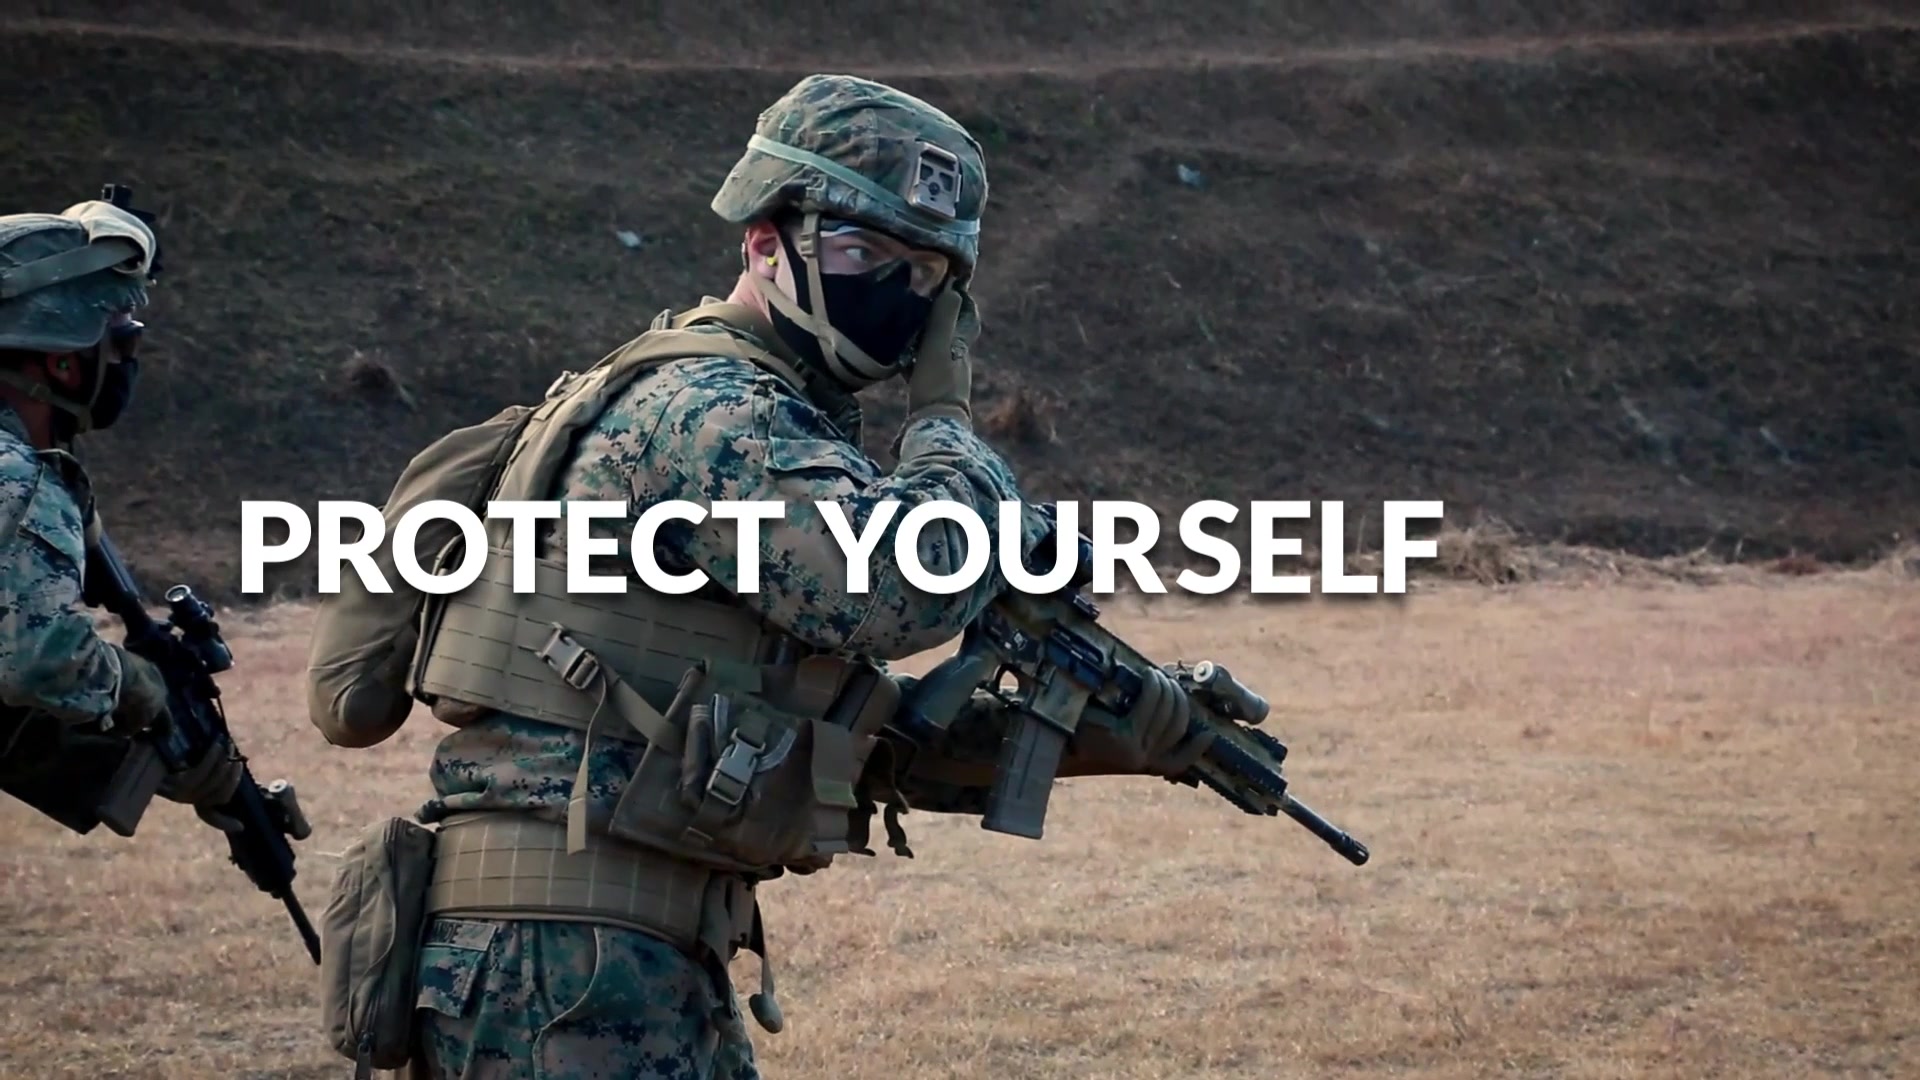 A Department of Defense Public Service Announcement communicating that receiving the COVID-19 vaccine protects yourself, your community, and our nation. Widespread vaccination against COVID-19 aligns with the Department of Defense’s priorities of protecting service members, DoD civilians, and families; safeguarding national security capabilities; and supporting the whole-of-nation response to the COVID-19 pandemic. (Video by Air Force Staff Sgt. Brycen Guerrero)